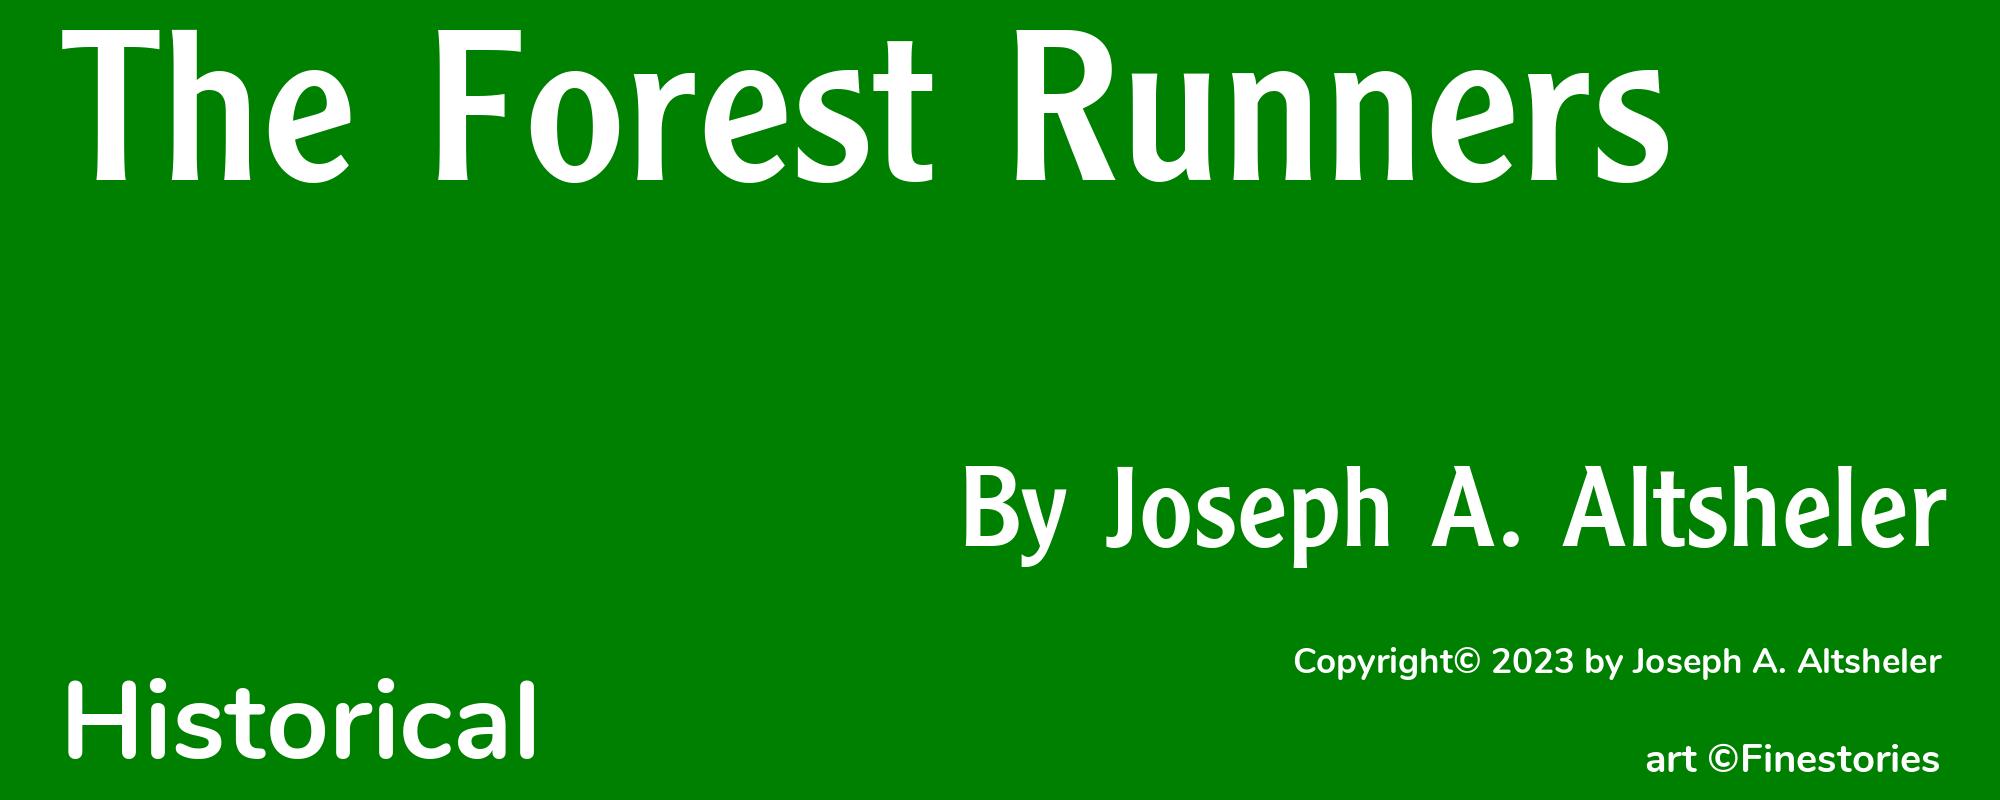 The Forest Runners - Cover